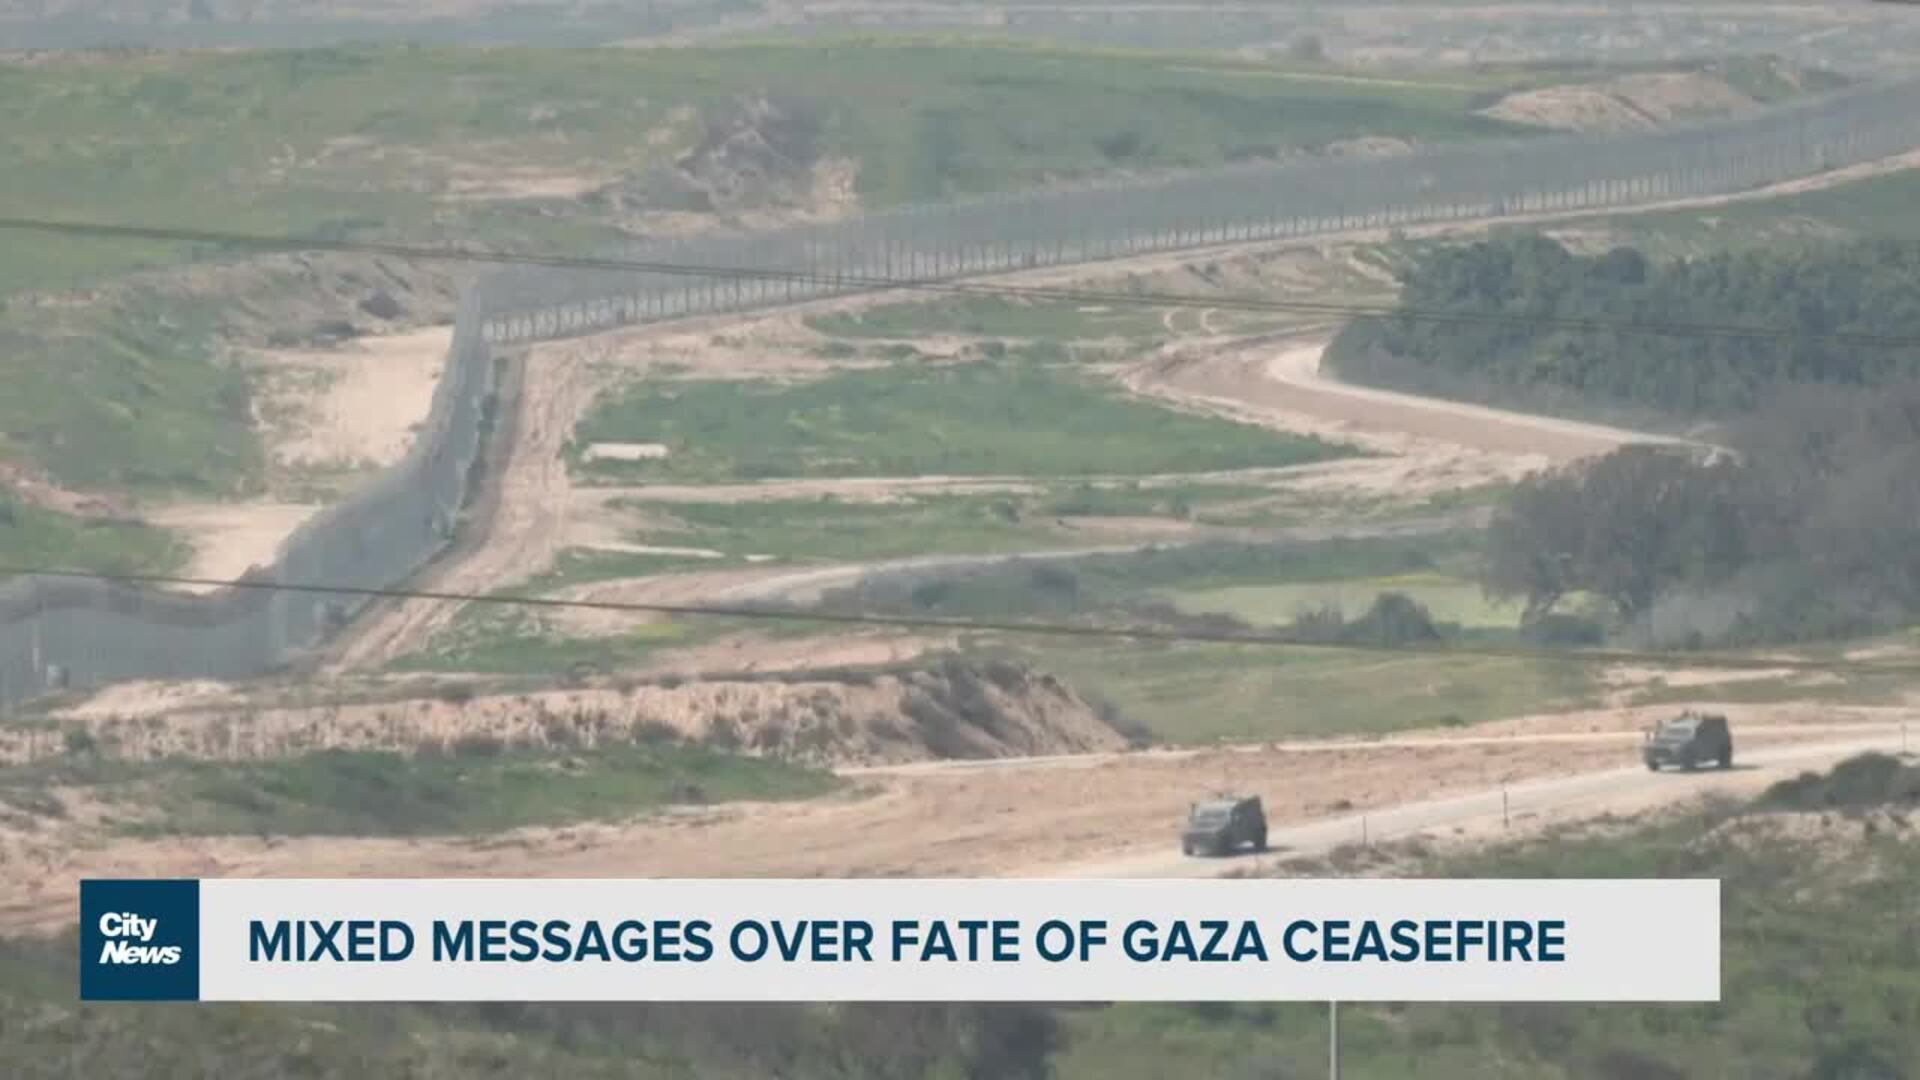 Mixed messages over fate of Gaza truce